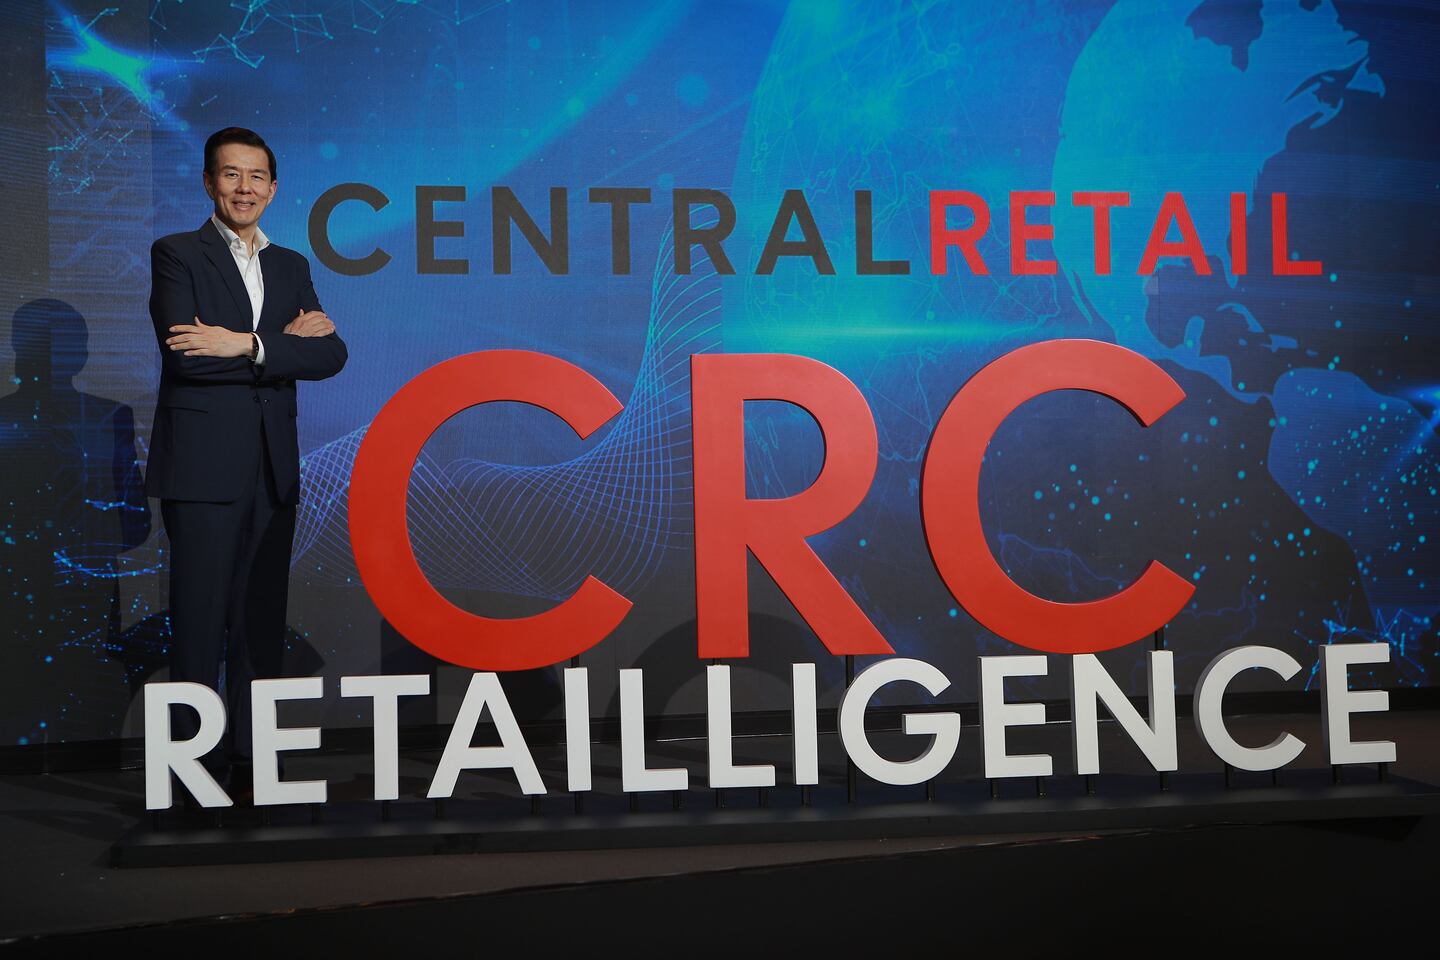 Central Retail CEO, Yol Phokasub, unveiled the new strategy this week.